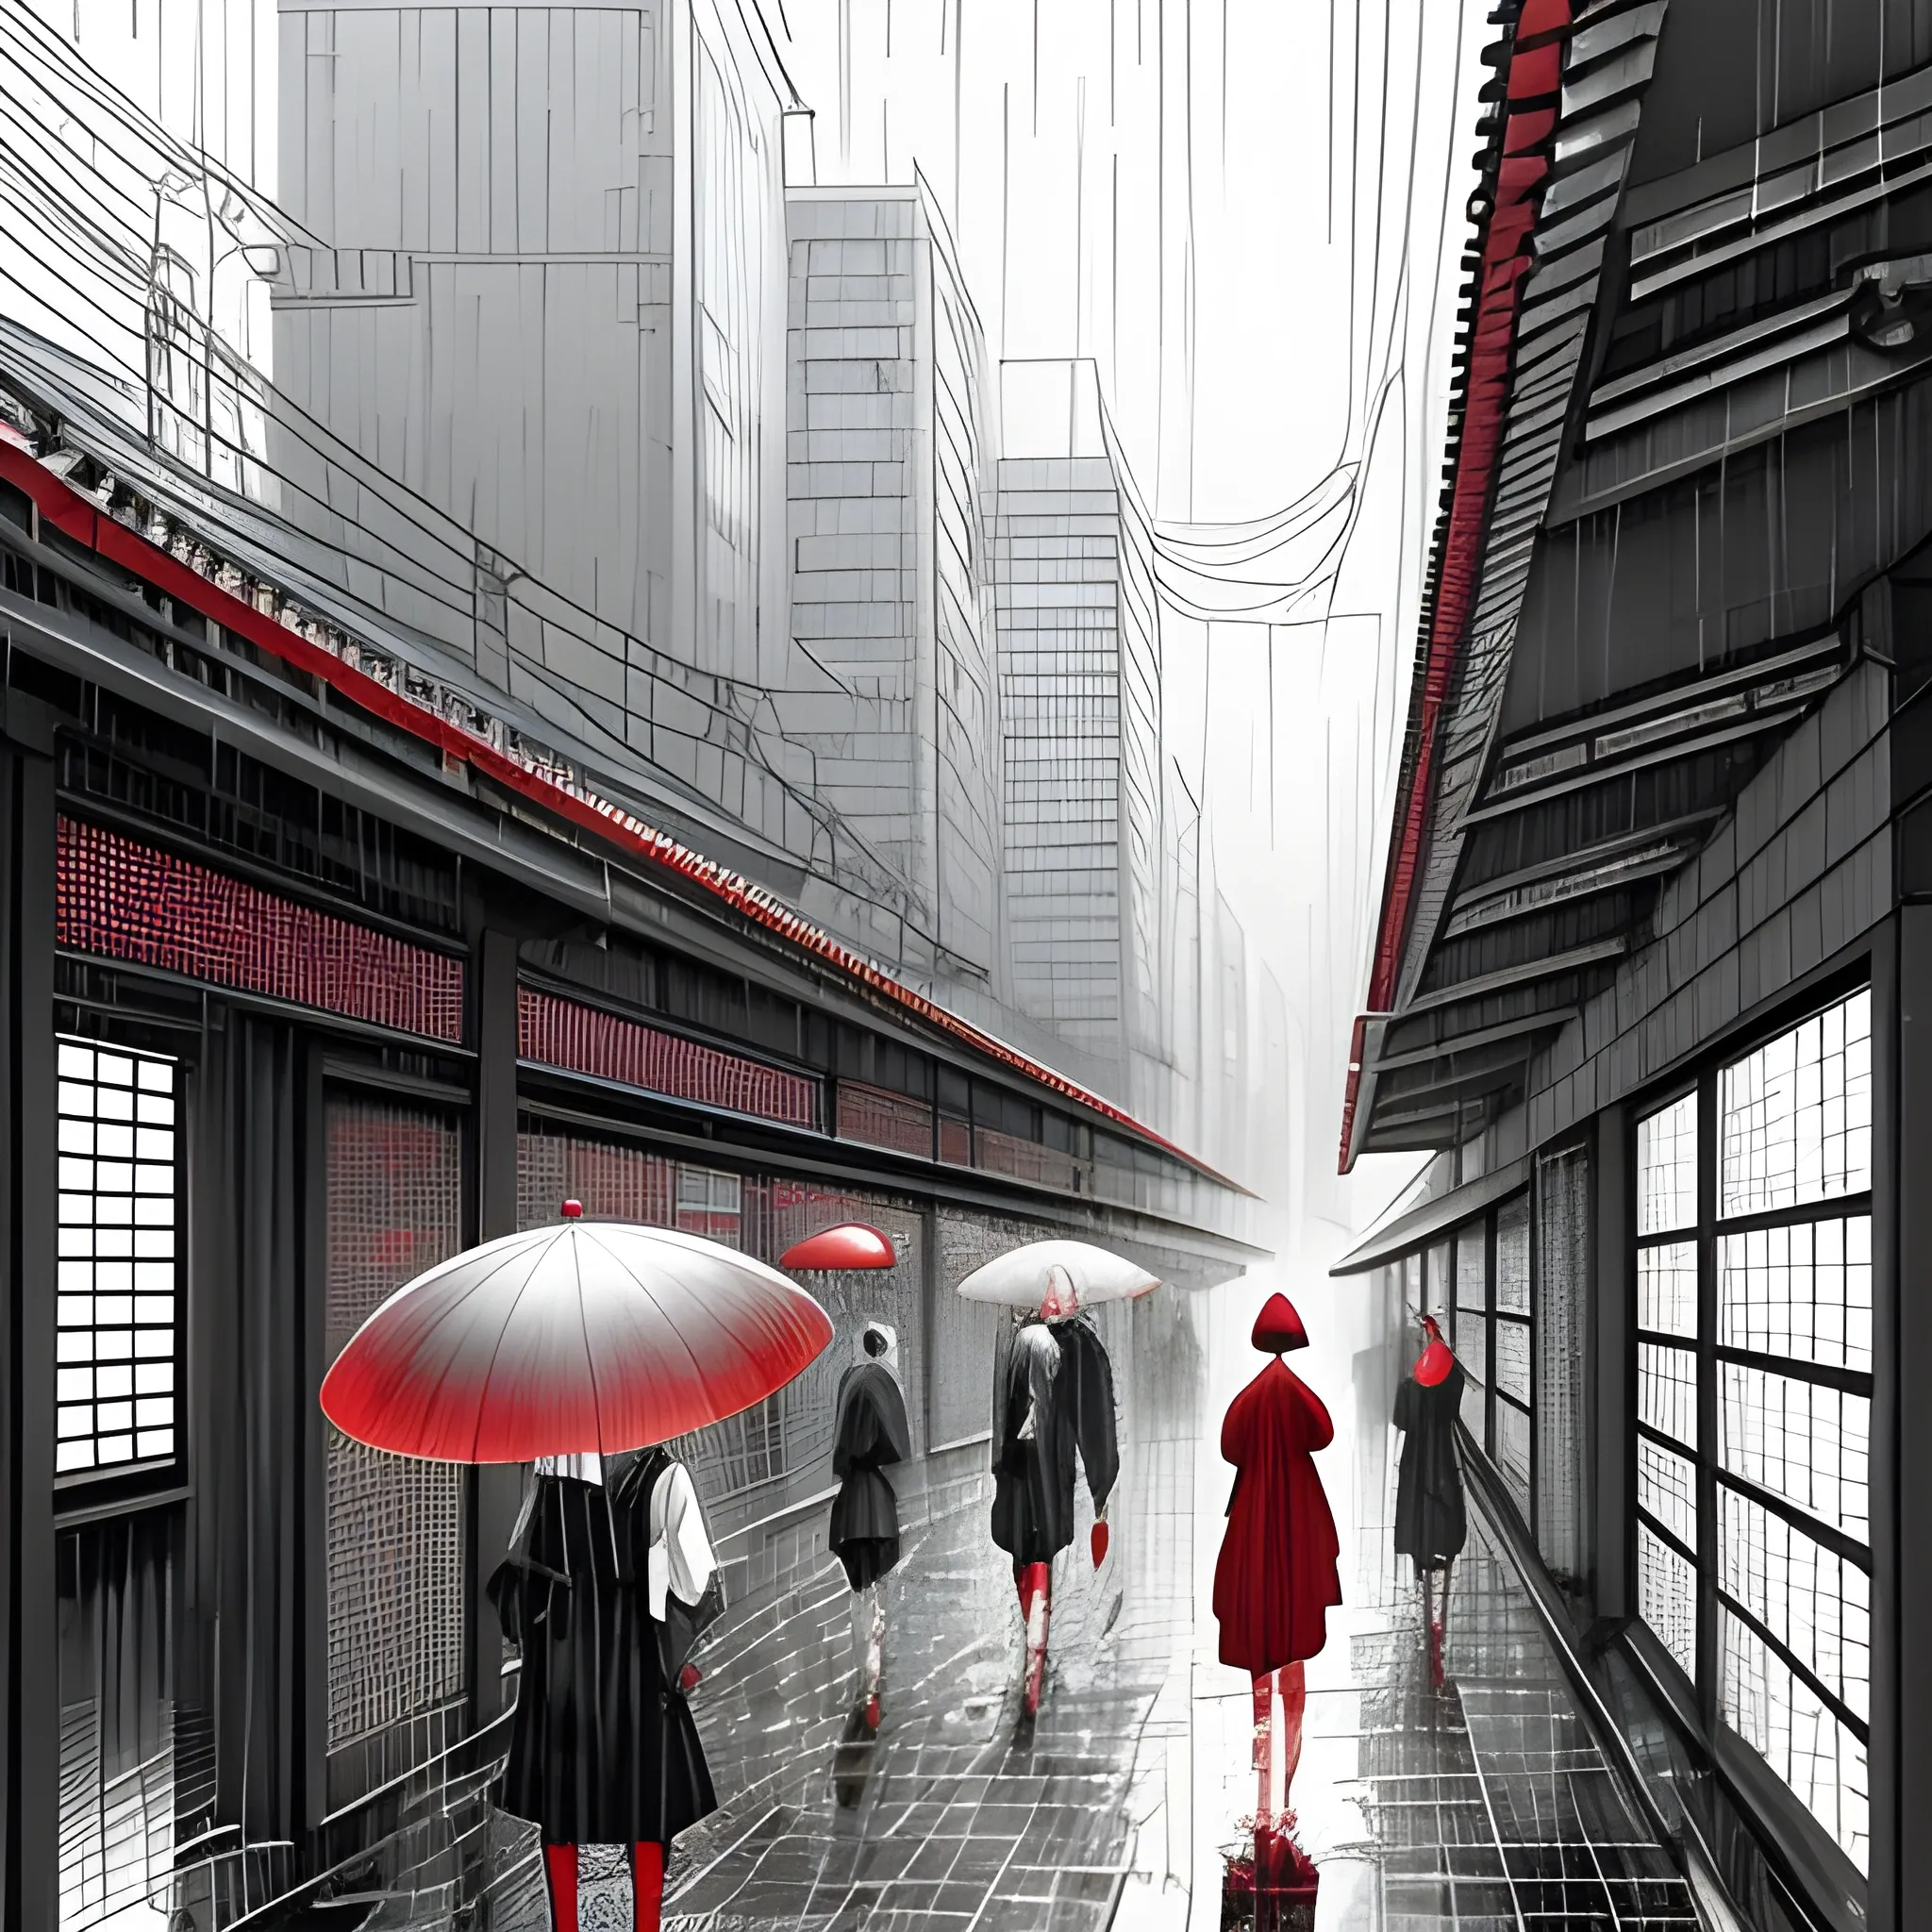 Tokyo metropolitan art style, bazaar, classical realism, surreal anime, cityscape, mysticism, gray tones and red, raindrops